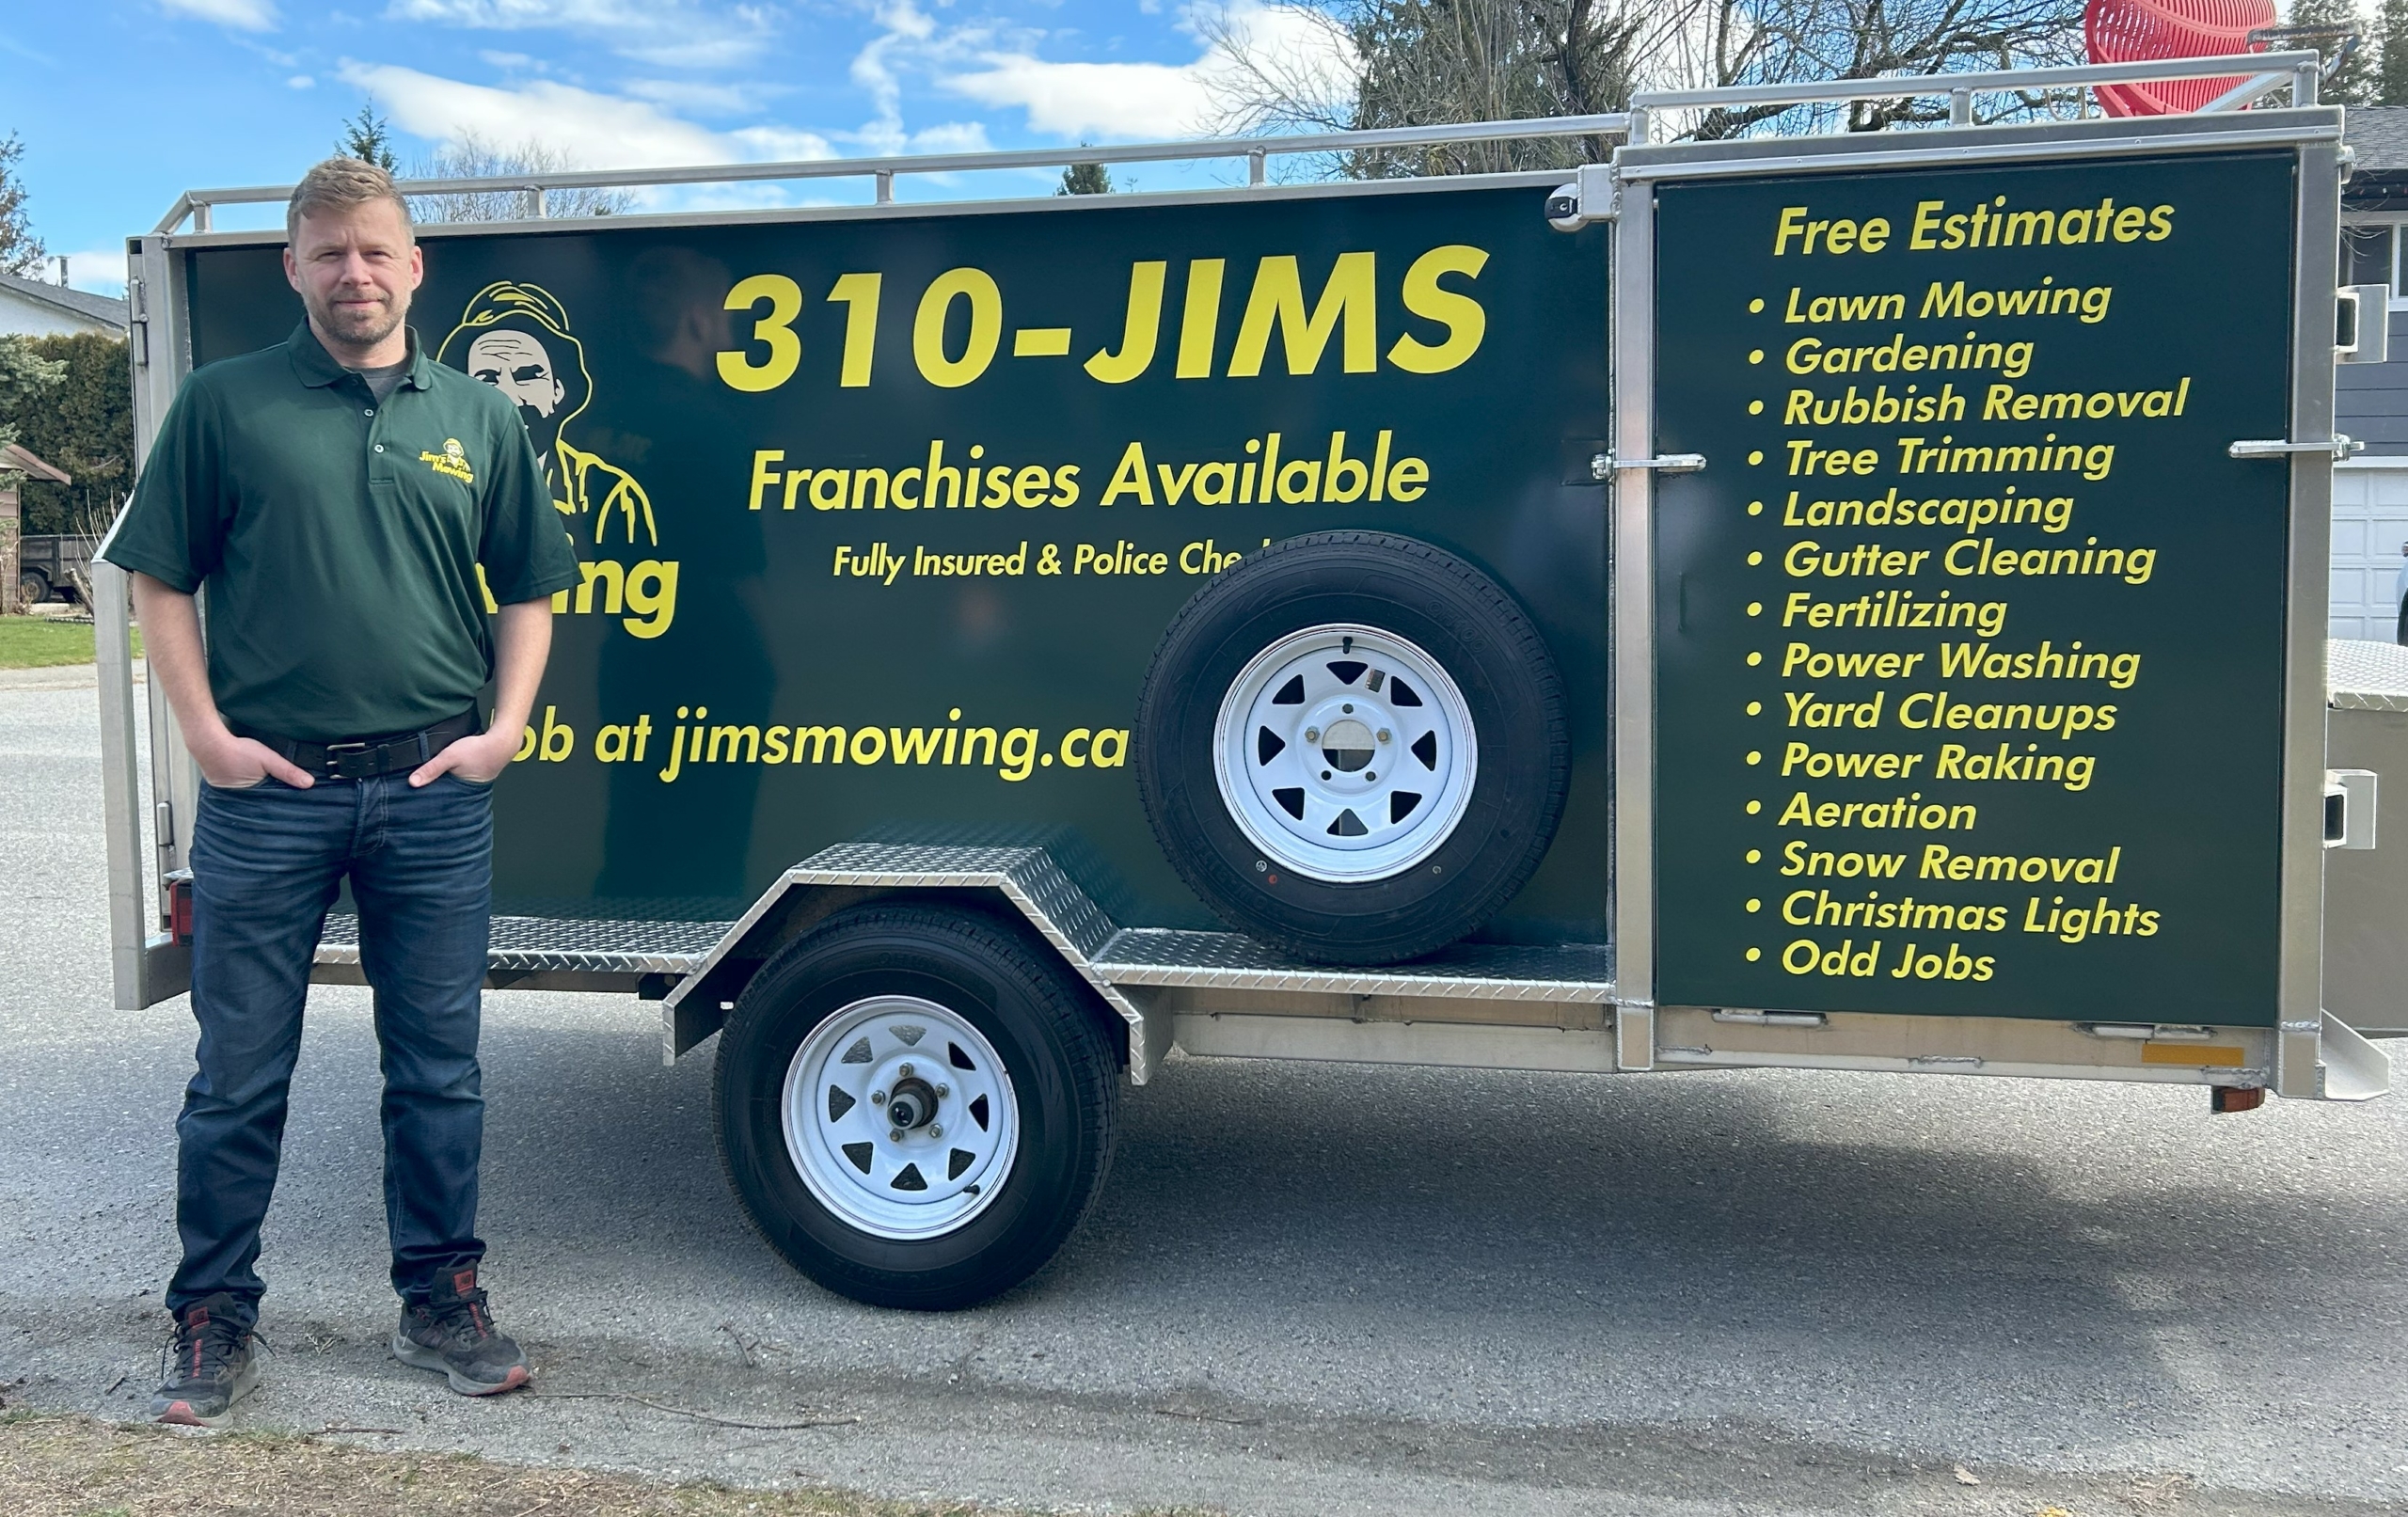 Jim’s Mowing Lawn Care Franchises in British Columbia